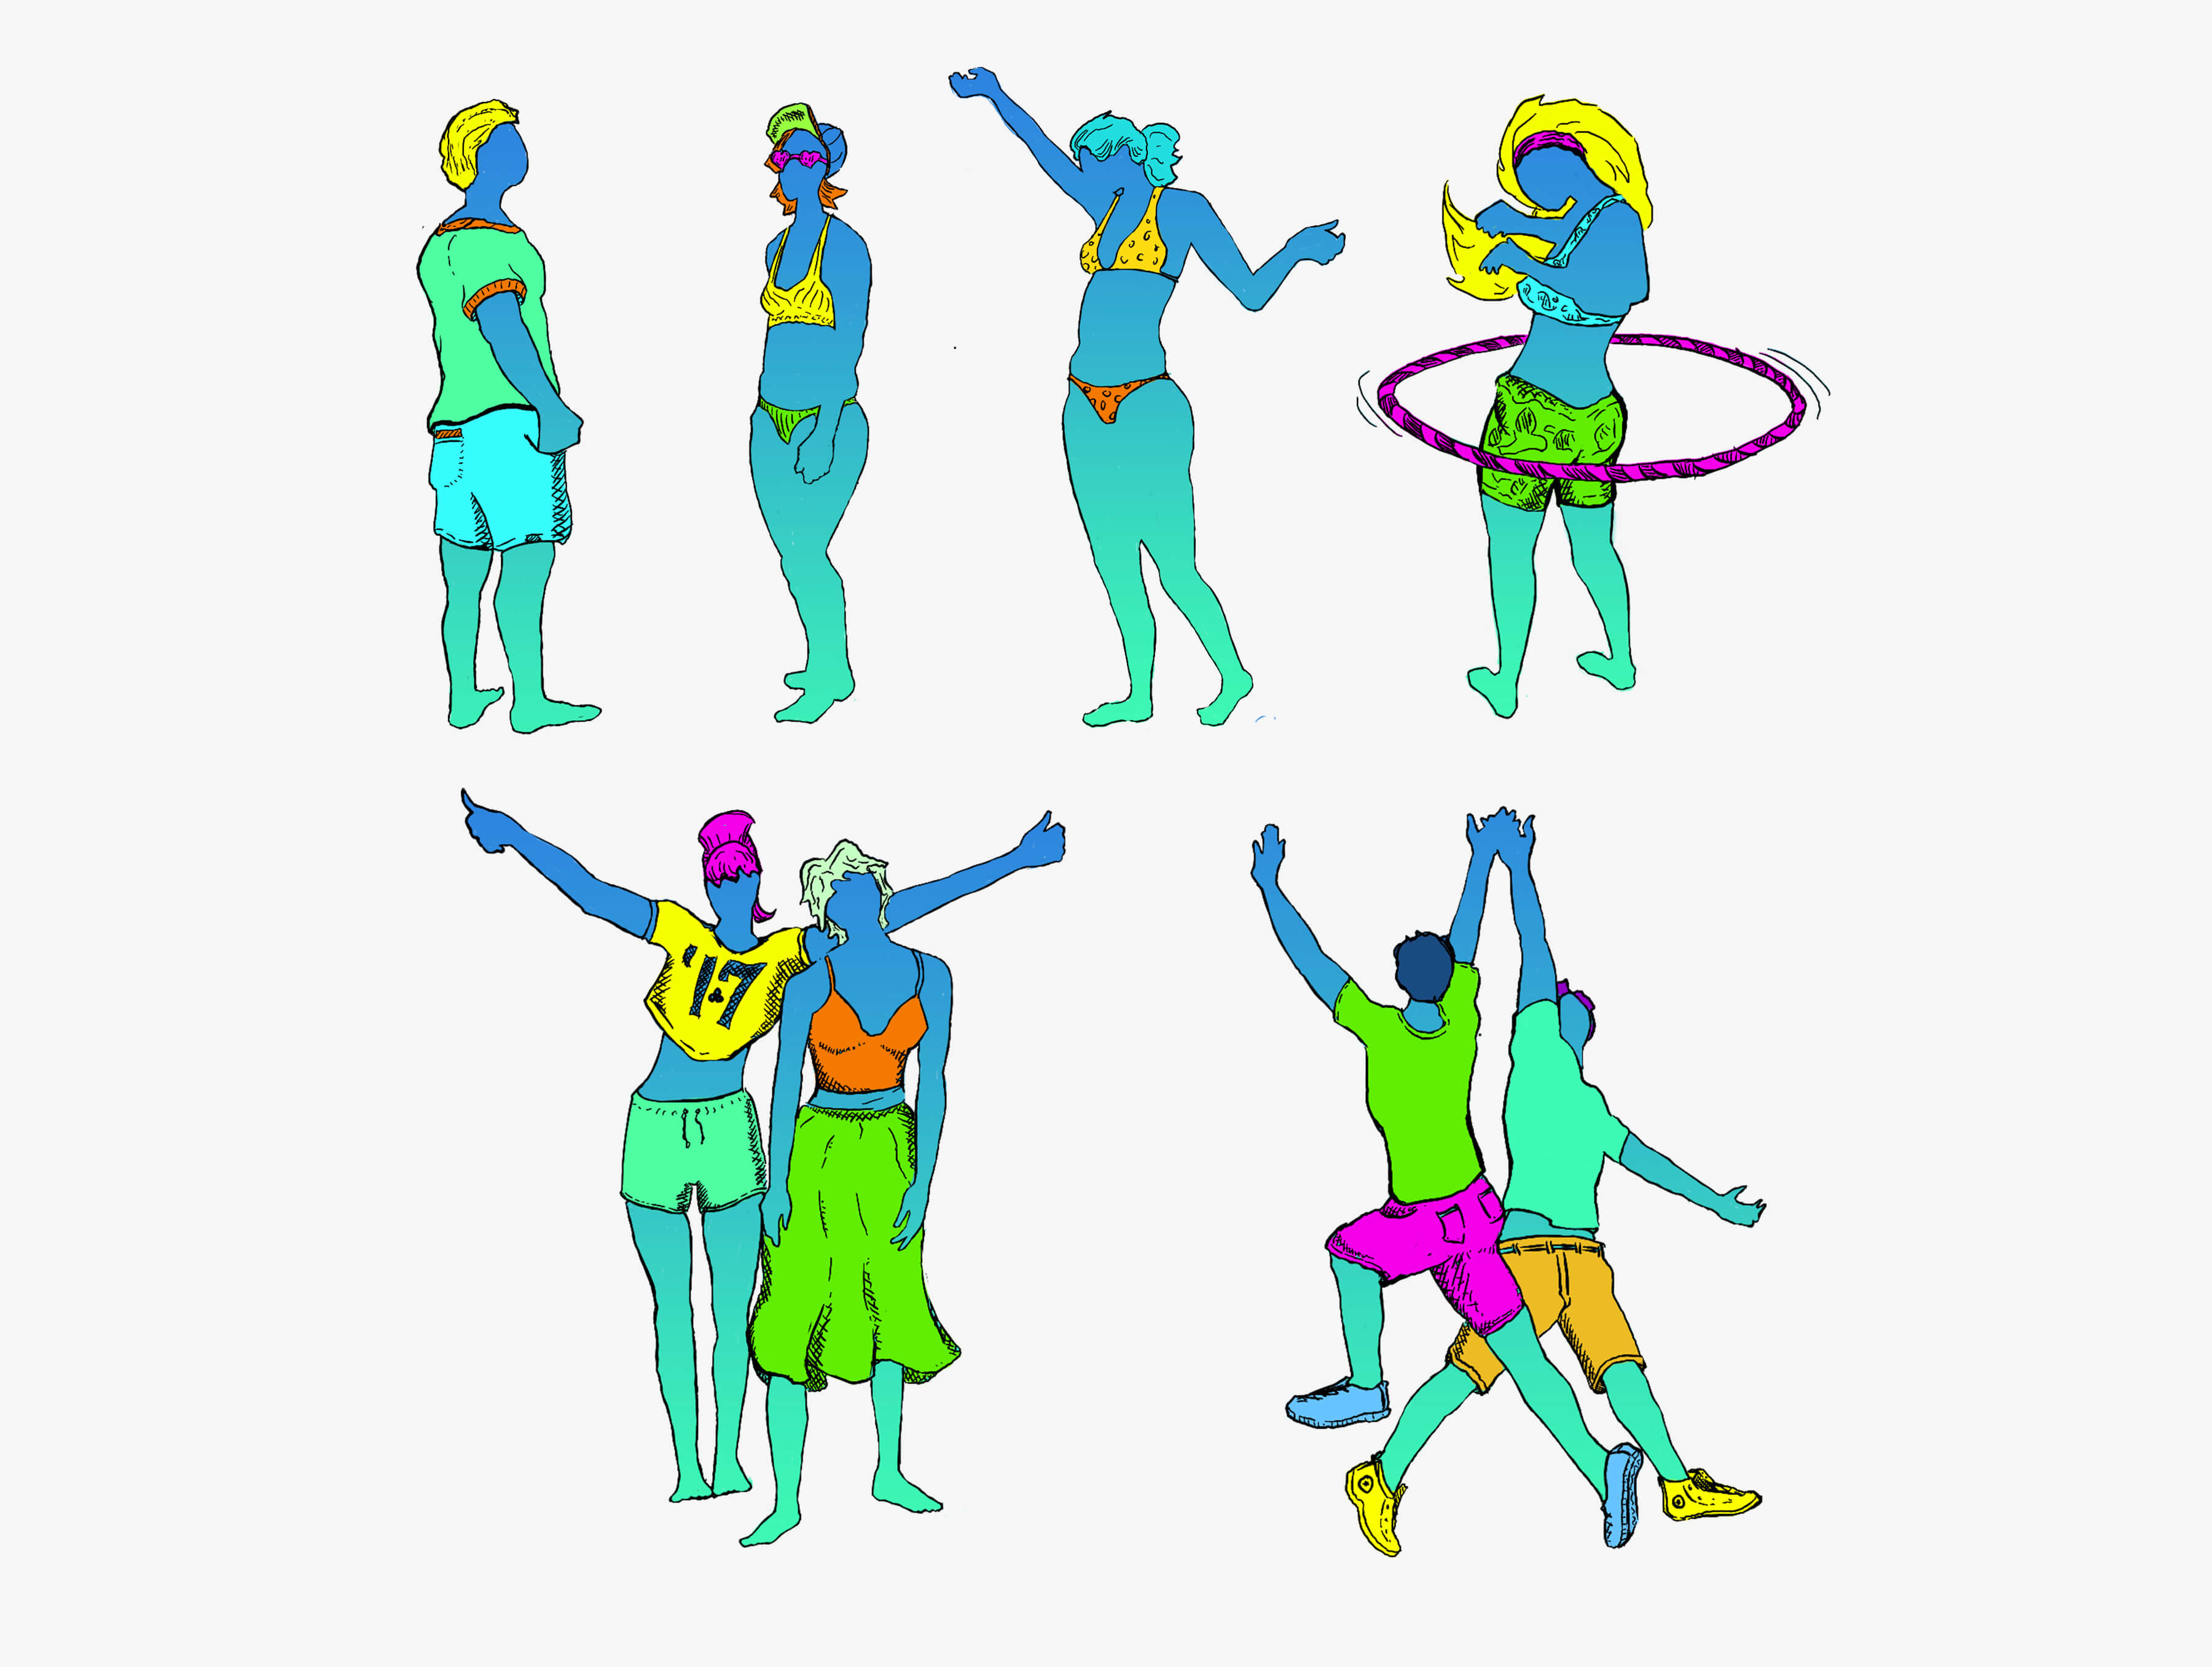 Illustrated Bonnaroo people featuring people dancing walking, high-fiving and having a good time.